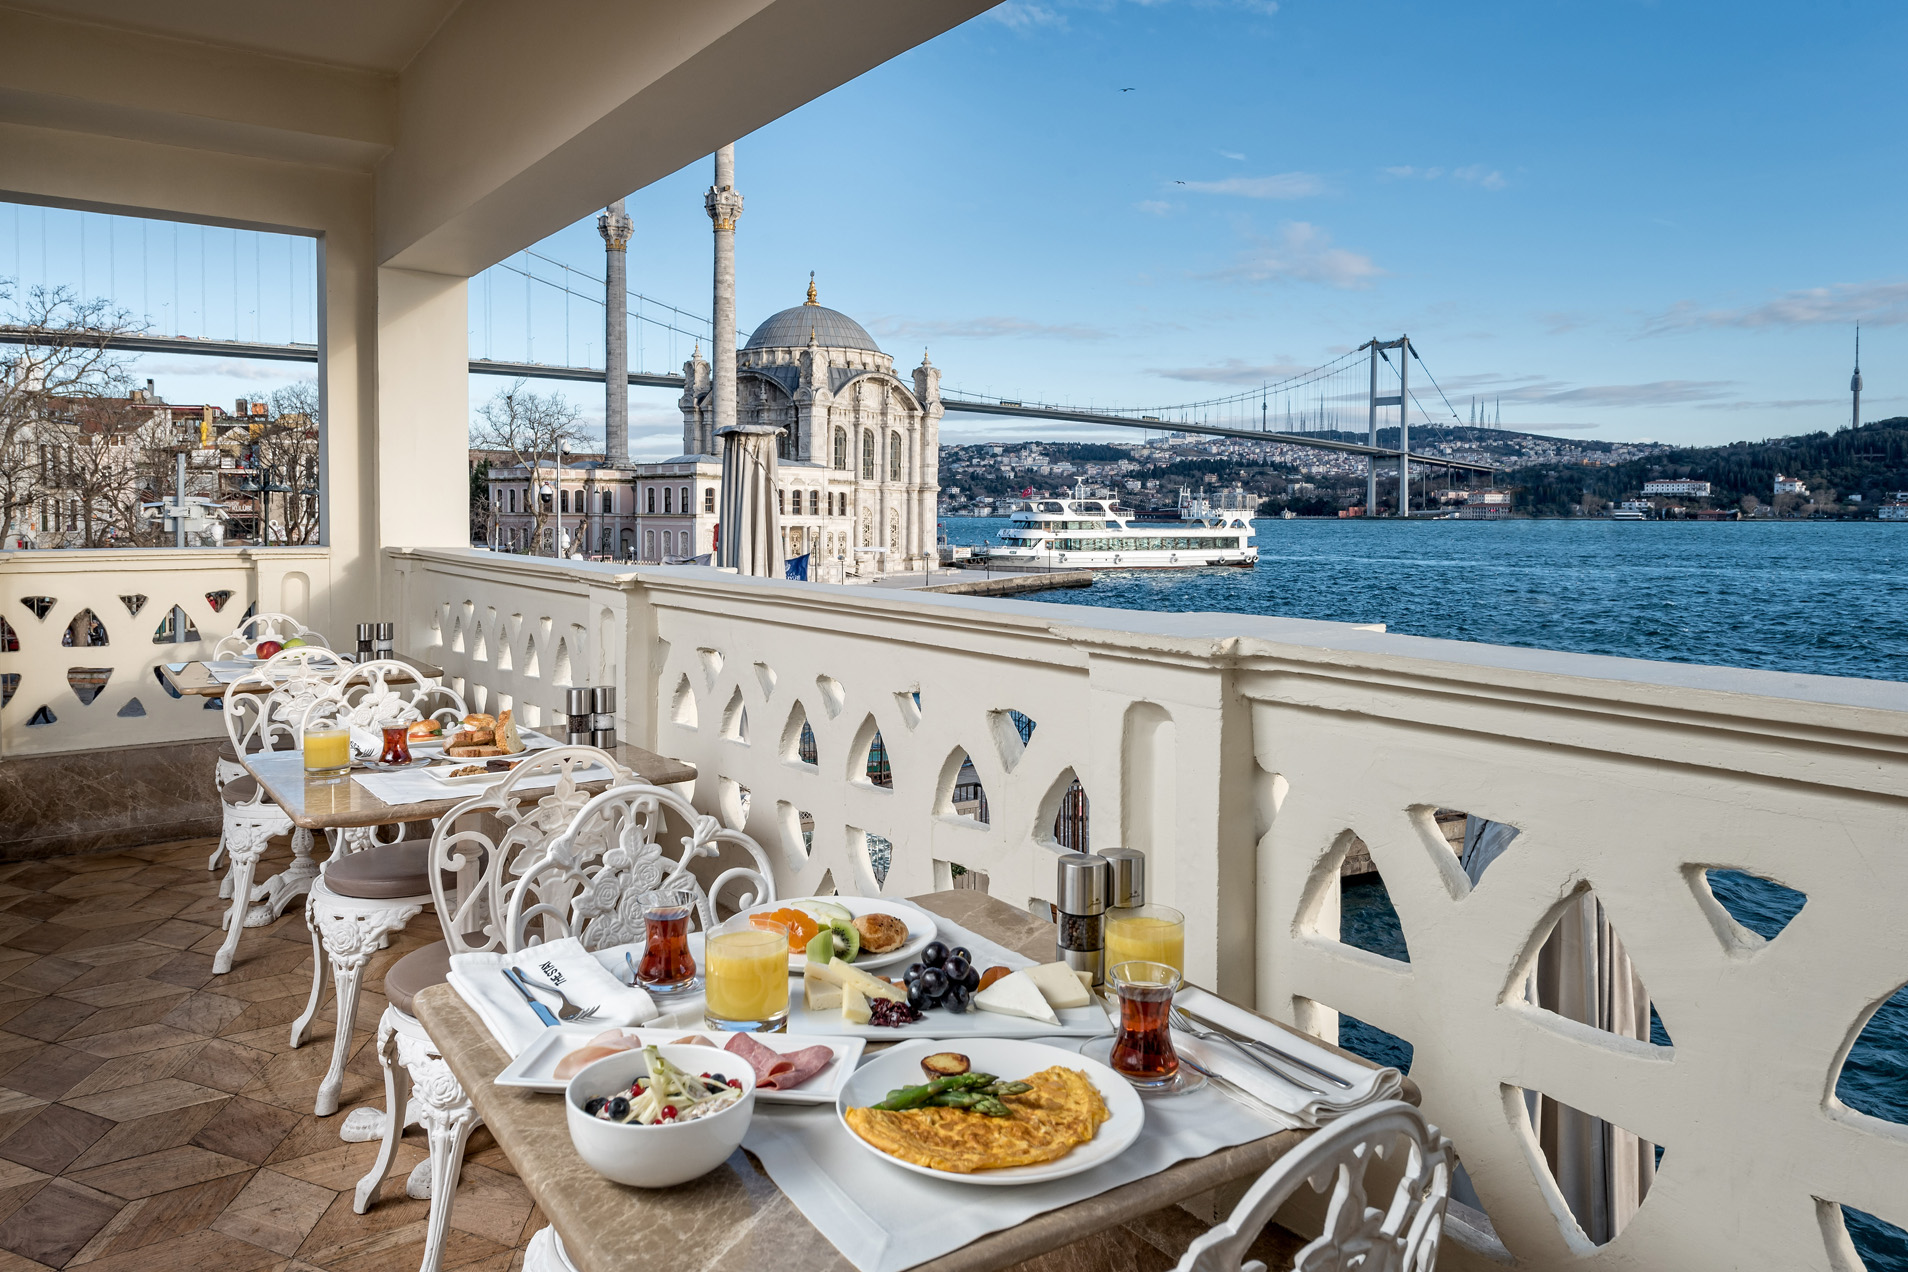 This Turkish Hotel Group is Carbon Neutral – Here’s How They Did It